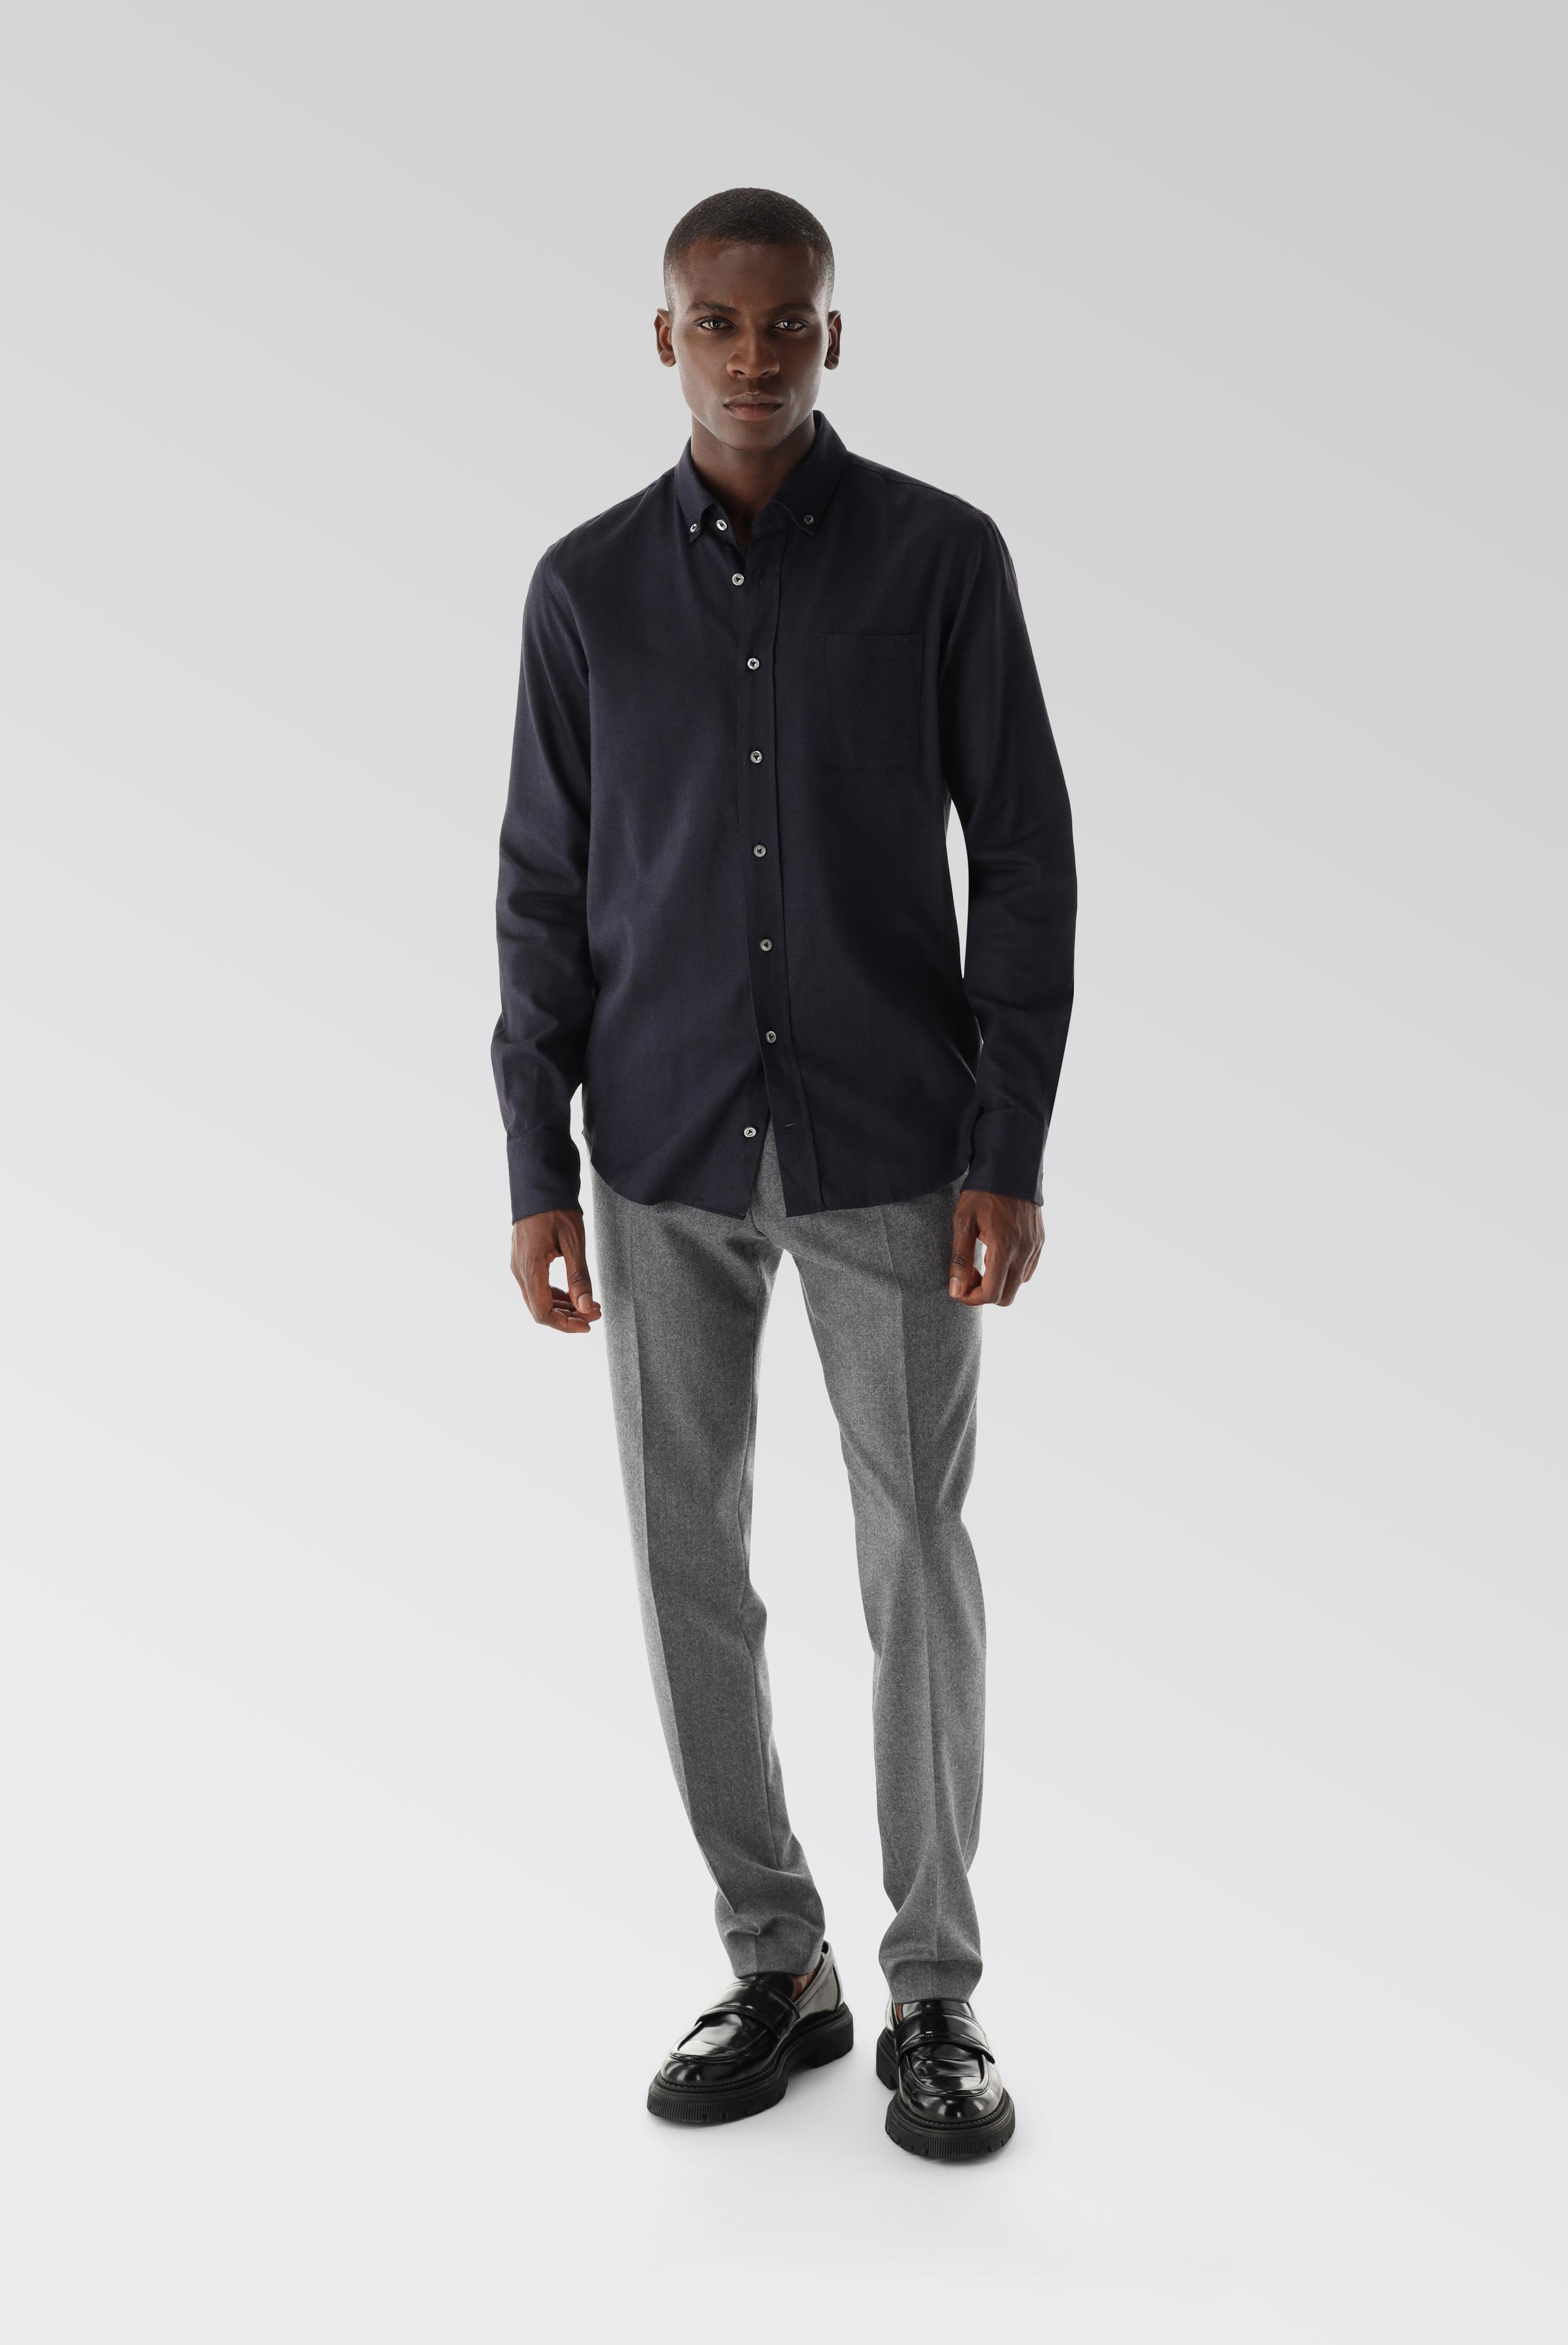 Casual Hemden+Button-Down Flanellhemd Tailor Fit+20.2013.9V.155045.790.38